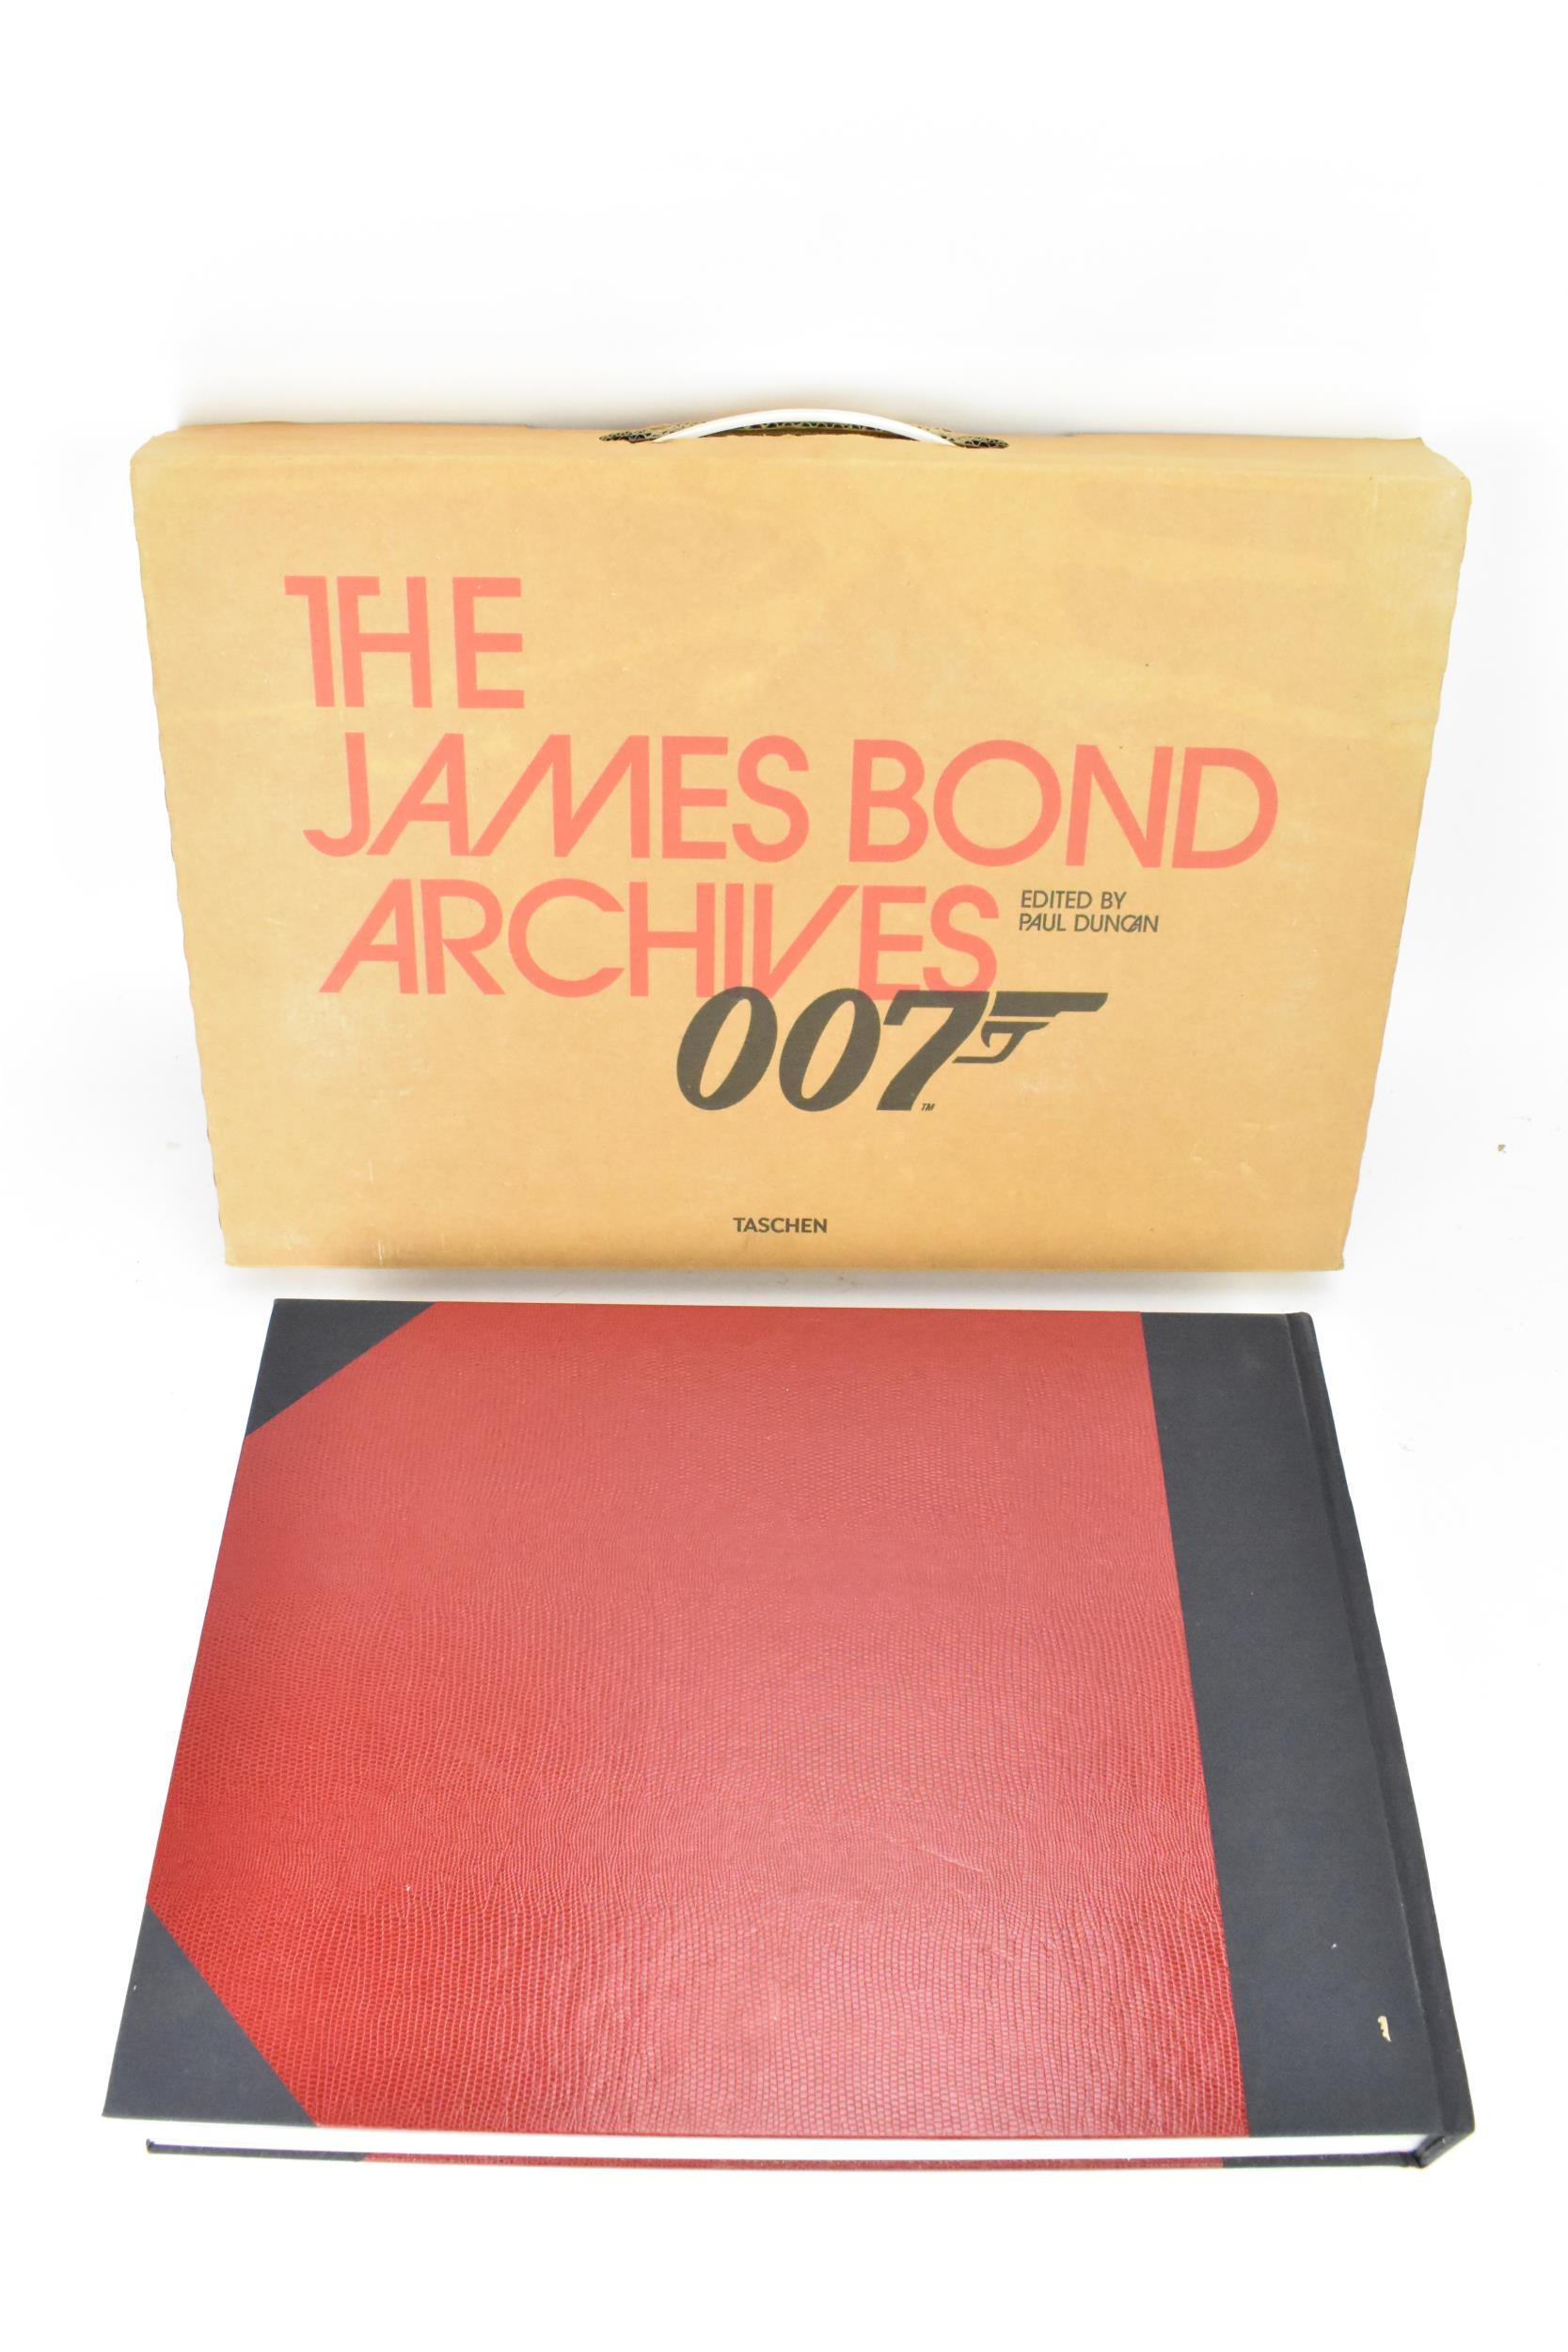 The James Bond Archives, 007, edited by Paul Duncan, published Taschen 2012, in original card - Image 2 of 3